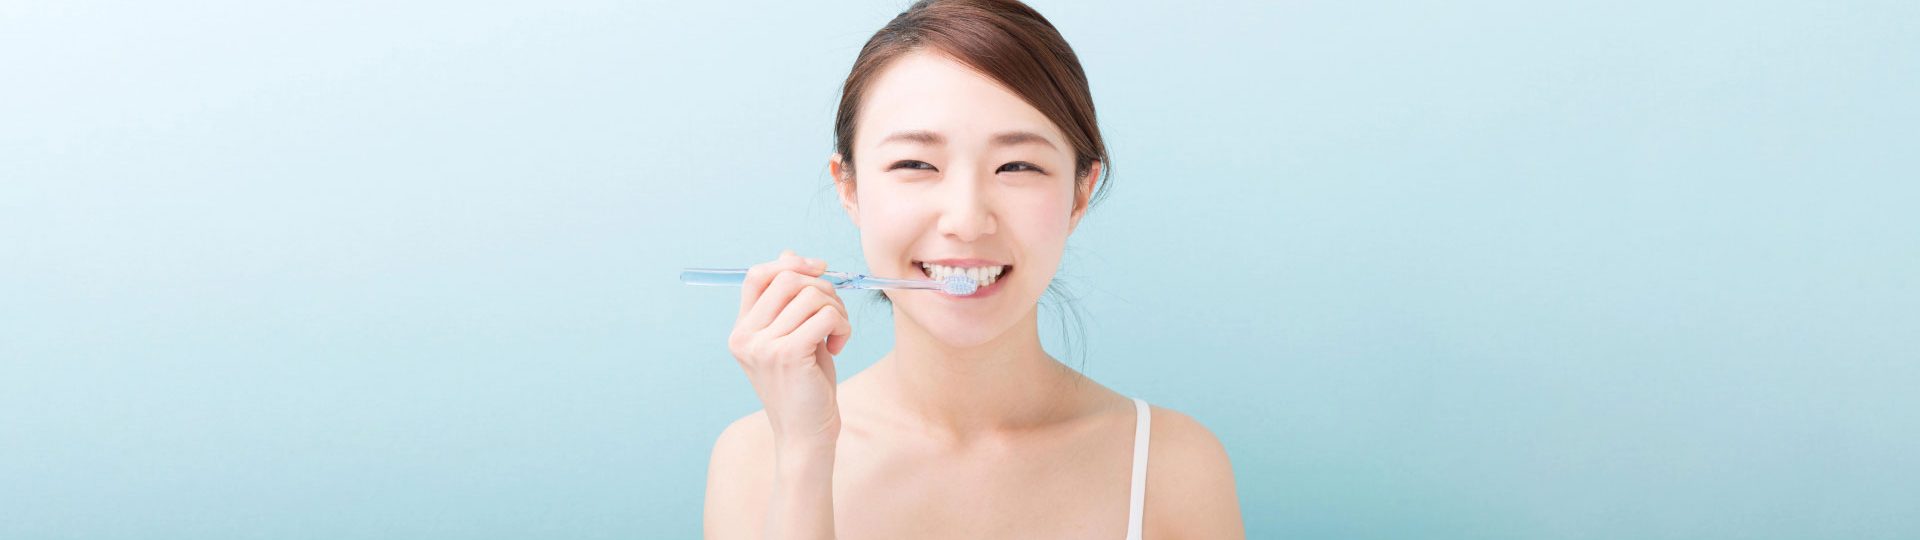 Common Oral Health Issues and How to Address Them